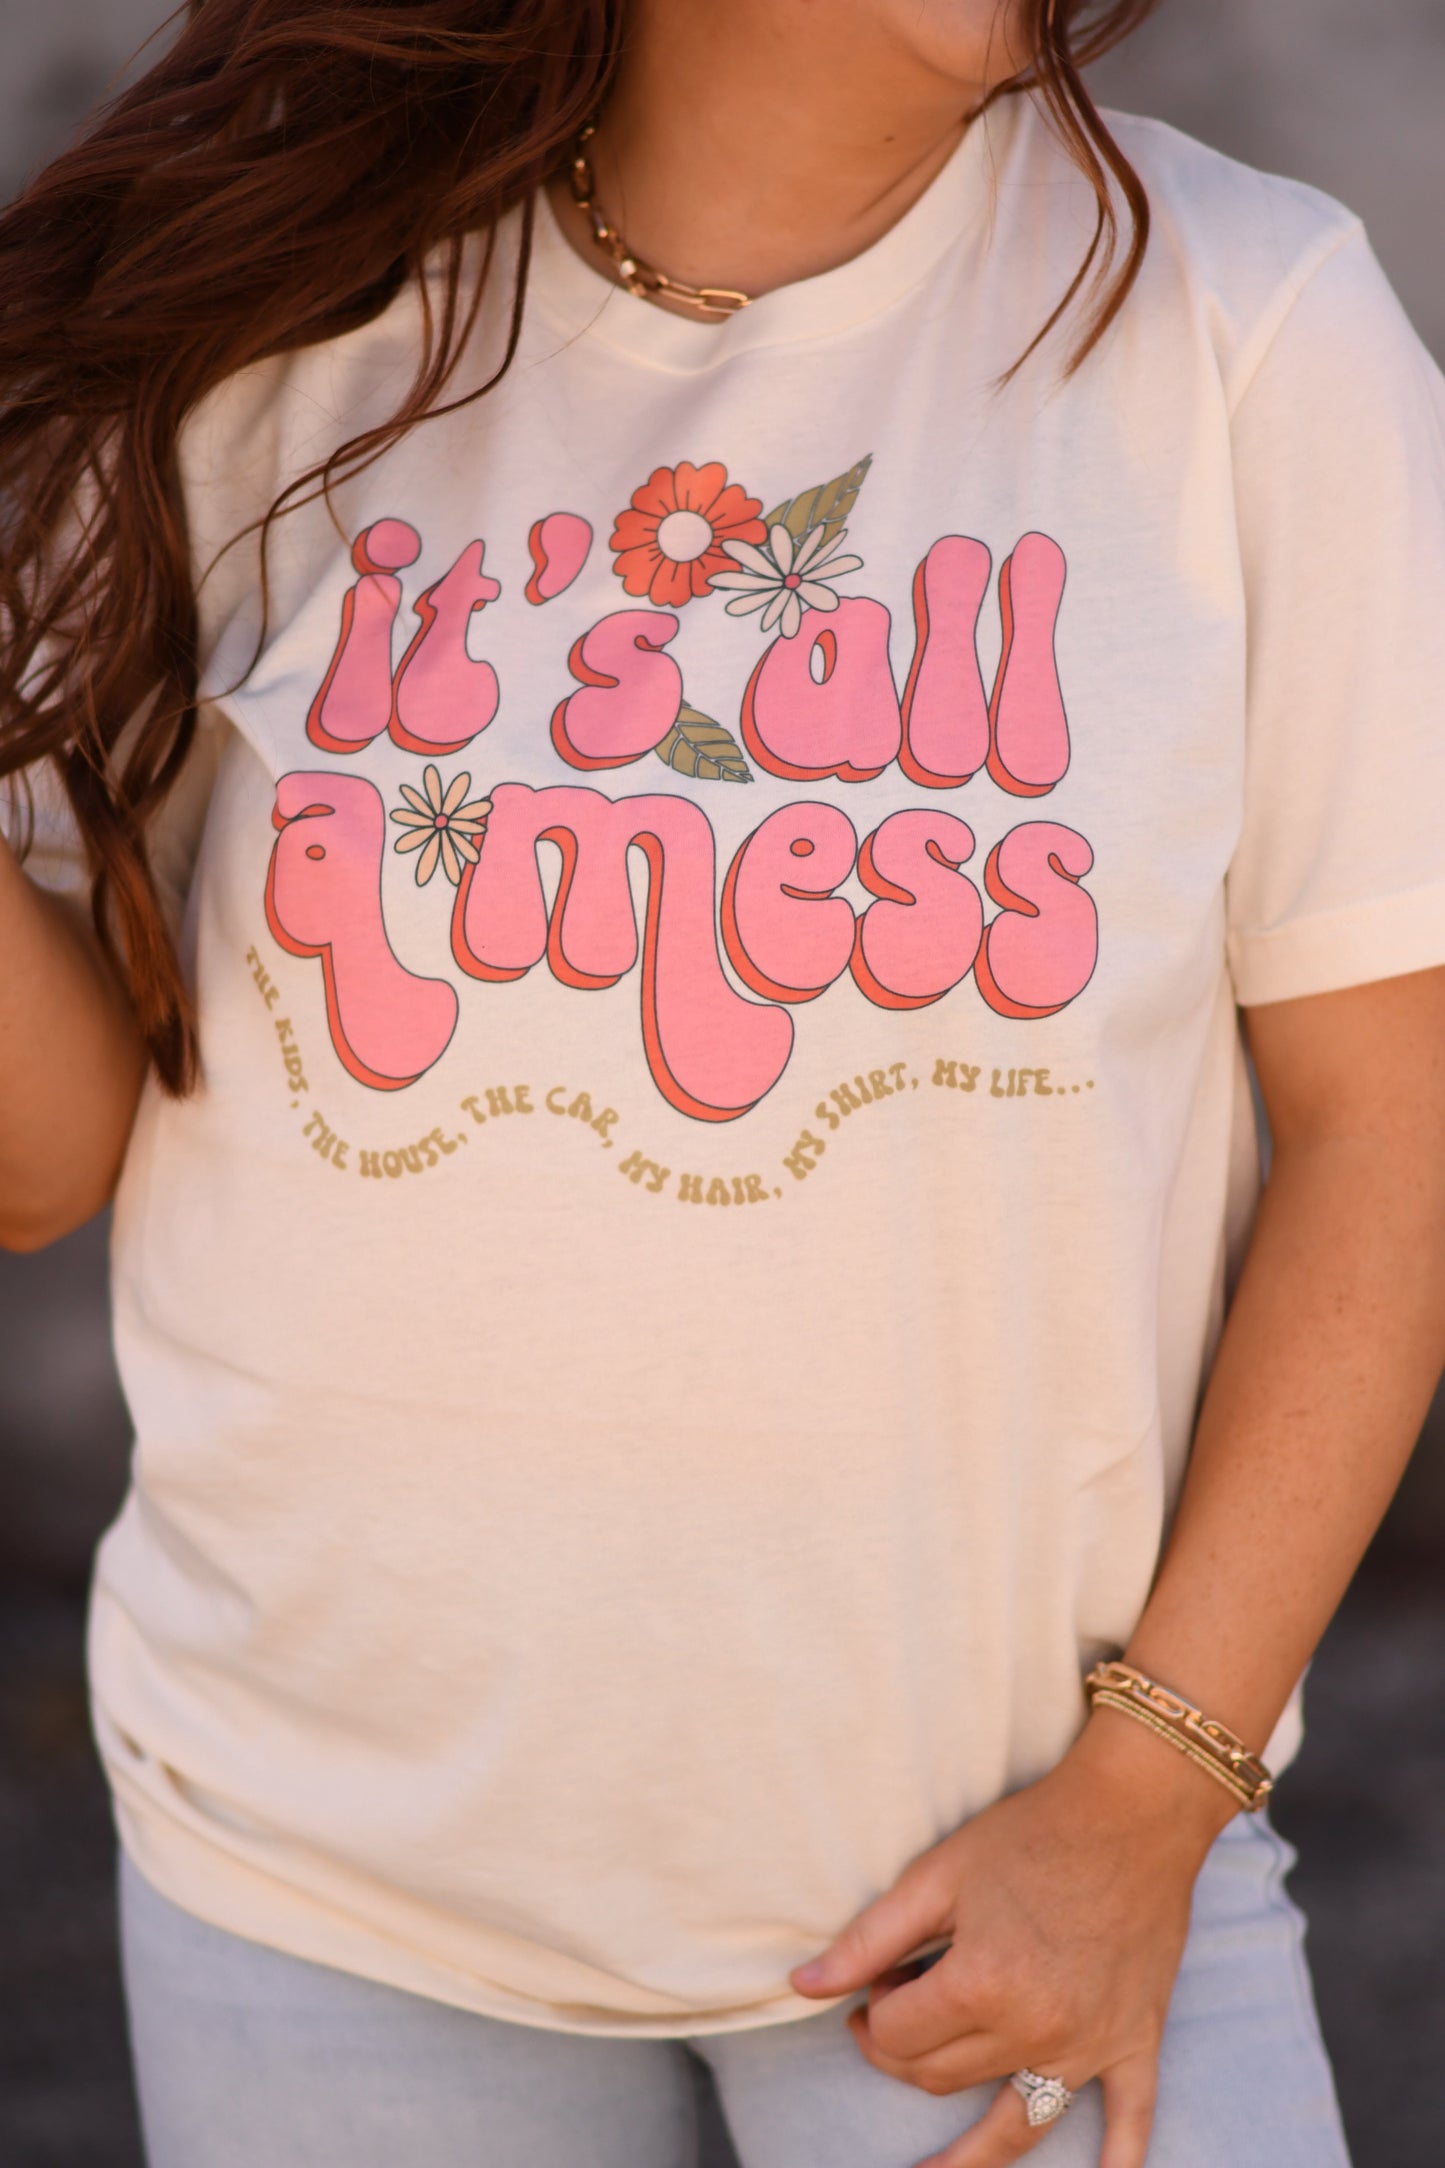 It’s all a mess tee